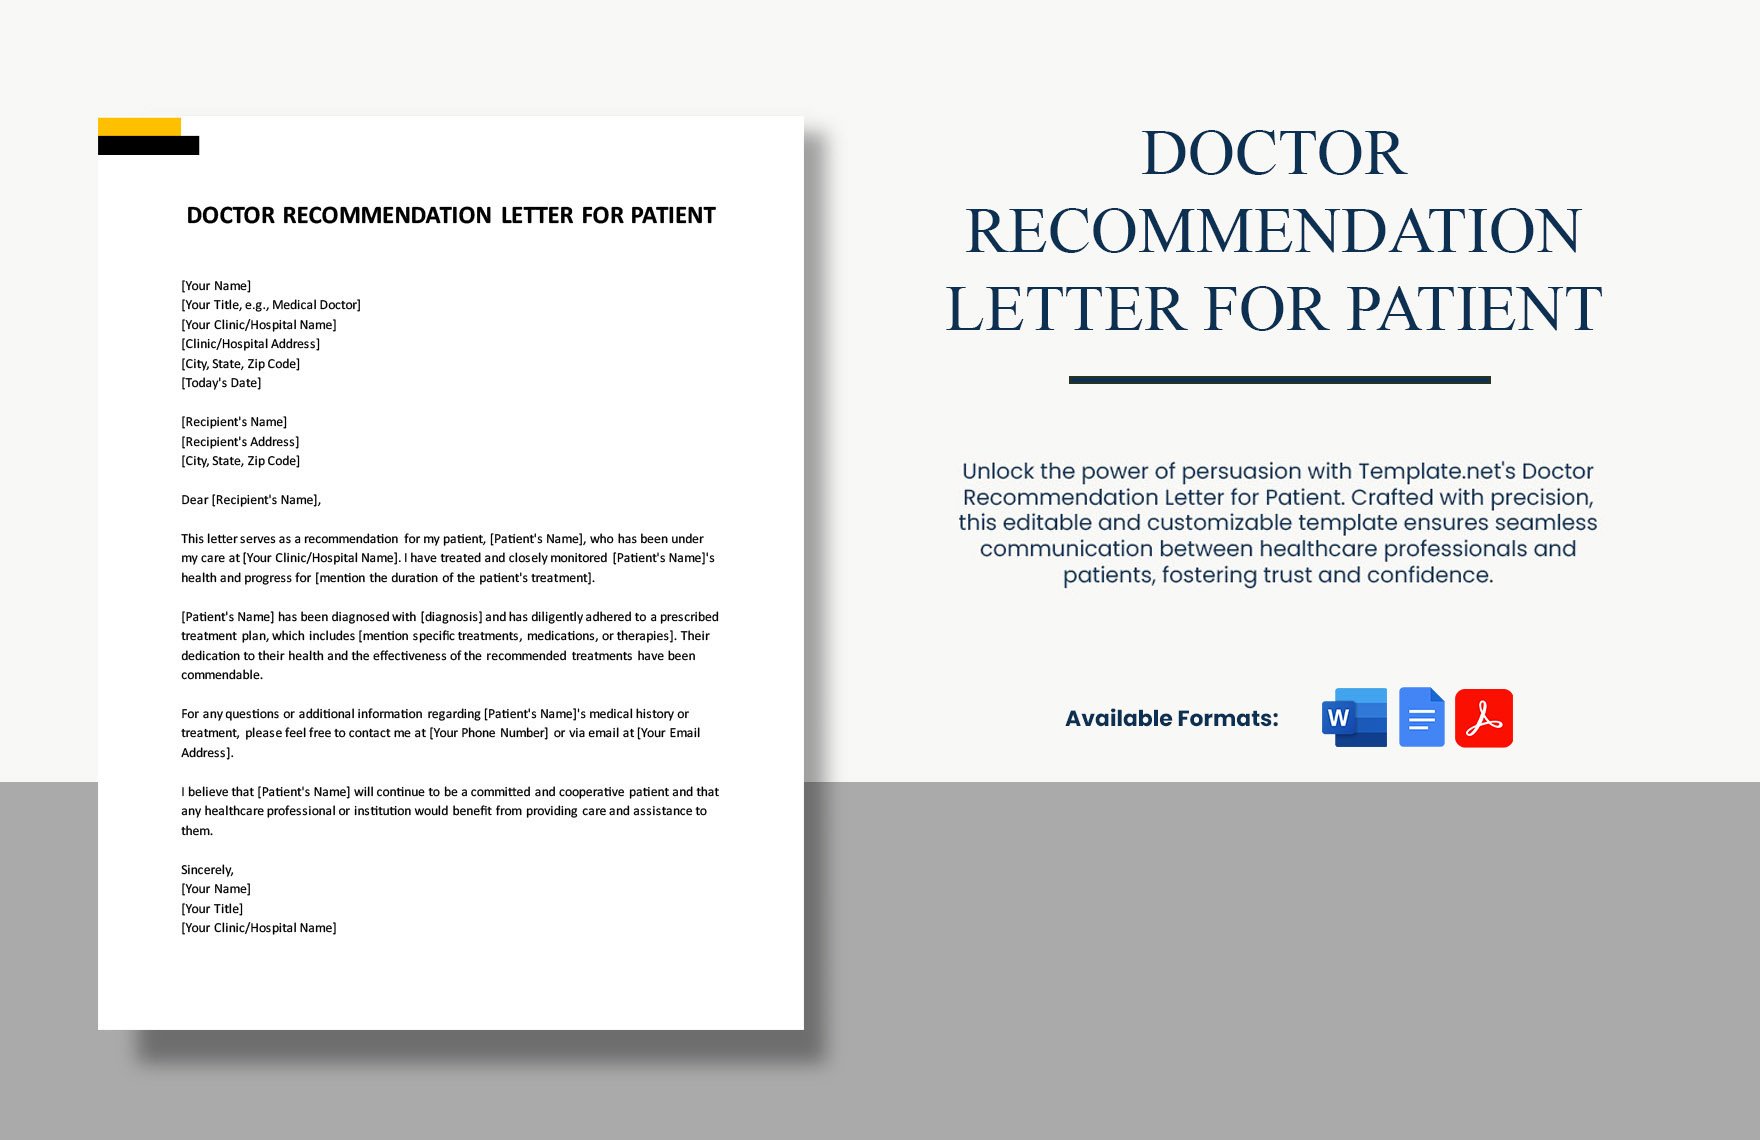 Doctor Recommendation Letter For Patient